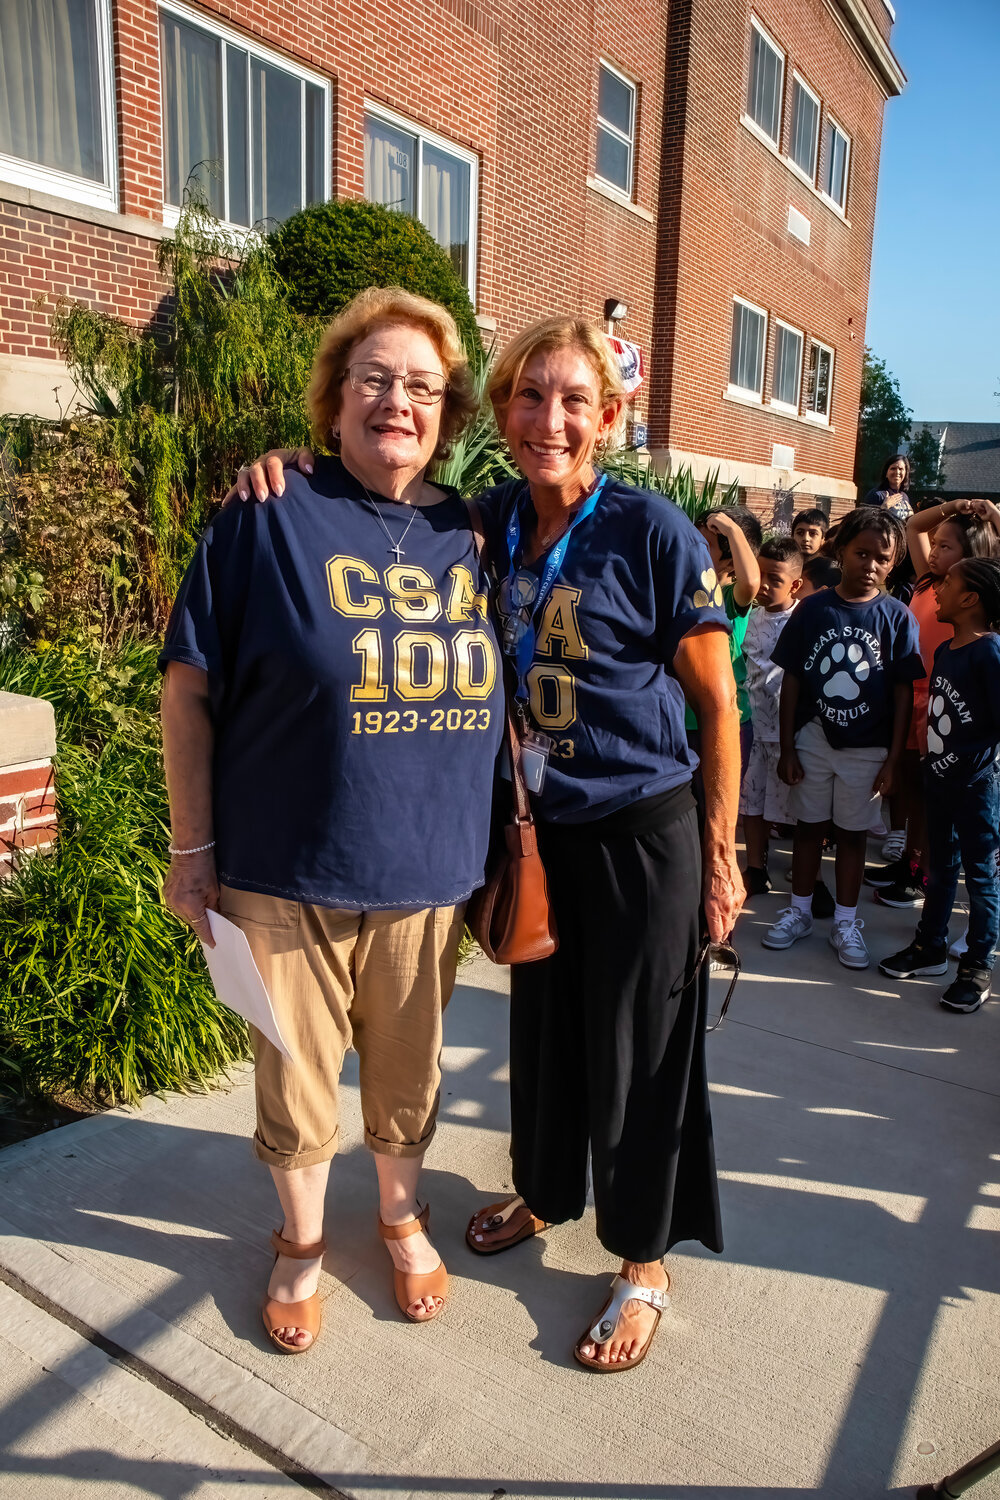 Teachers Doreen Imbriani and Roni Kunstler beamed with smiles celebrating the 100th anniversary of Clear Stream Avenue.